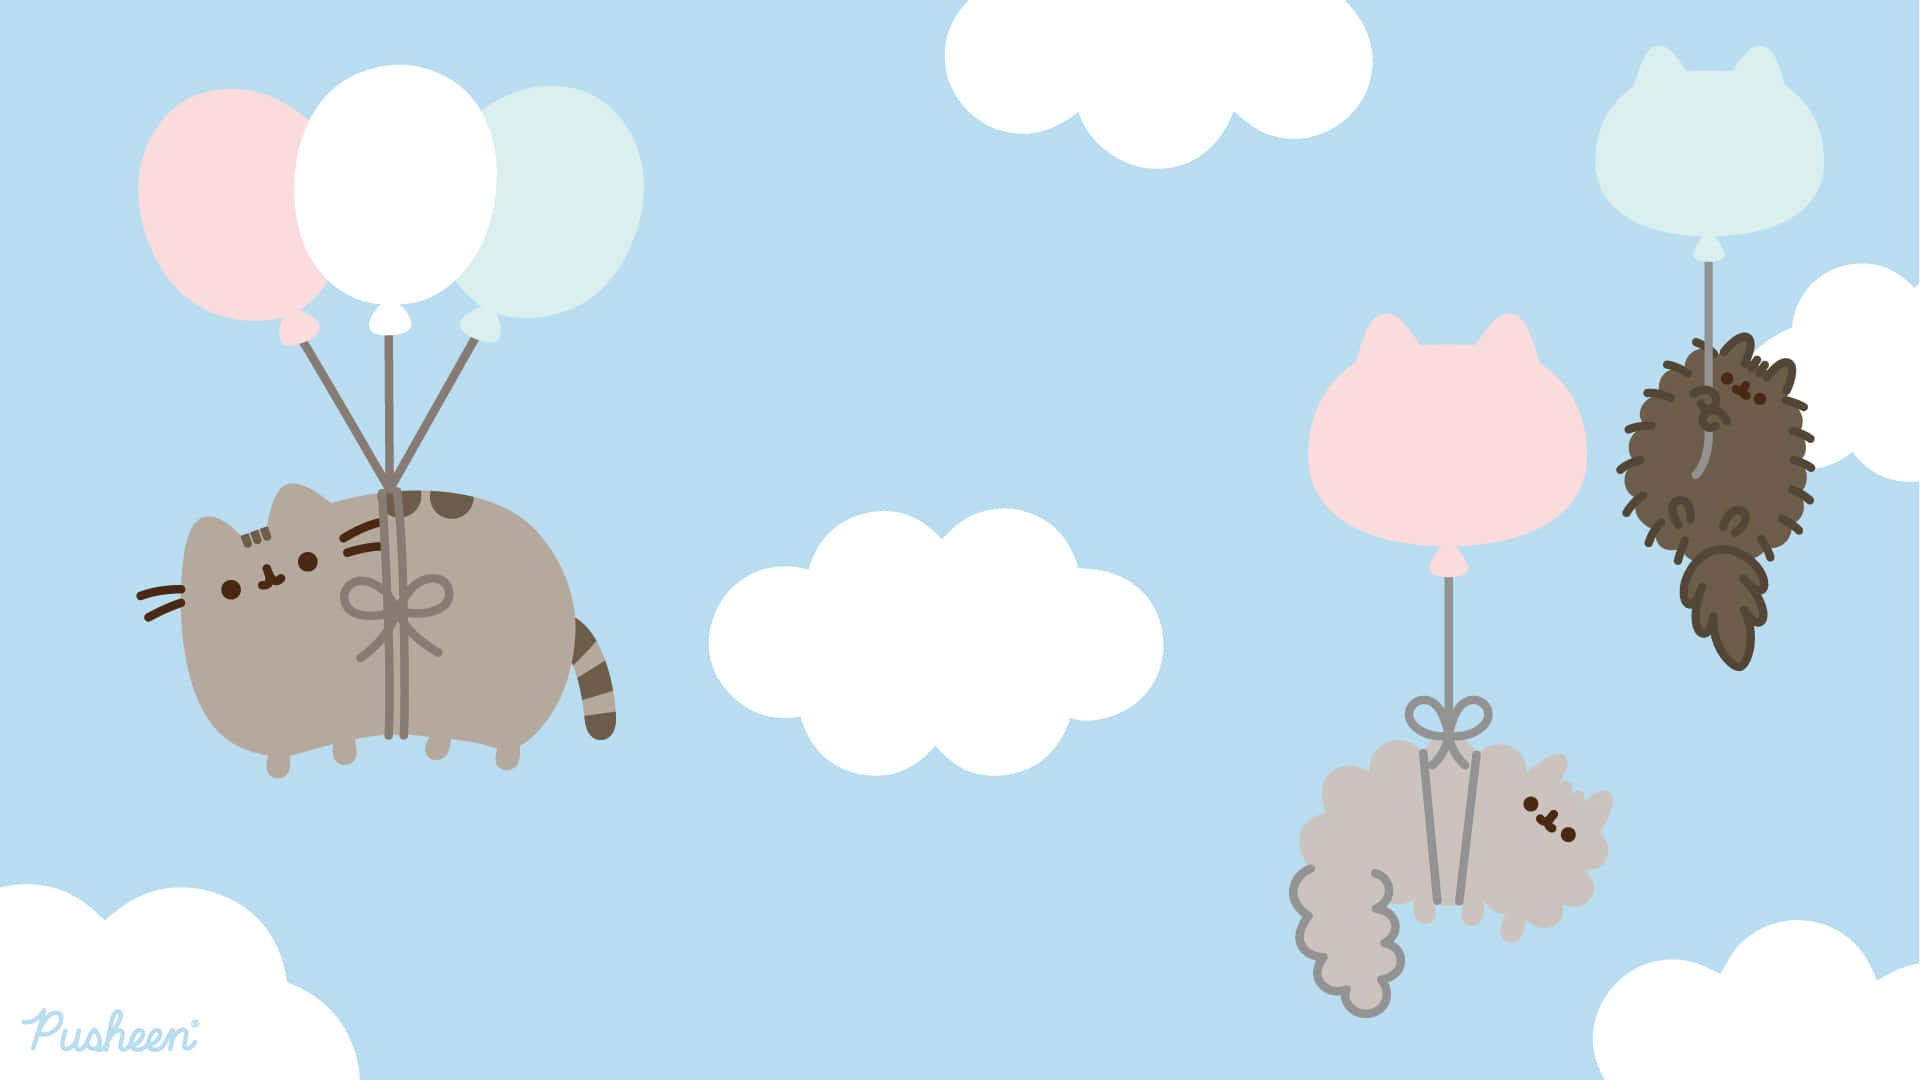 Add some cuteness to your life with Pusheen!